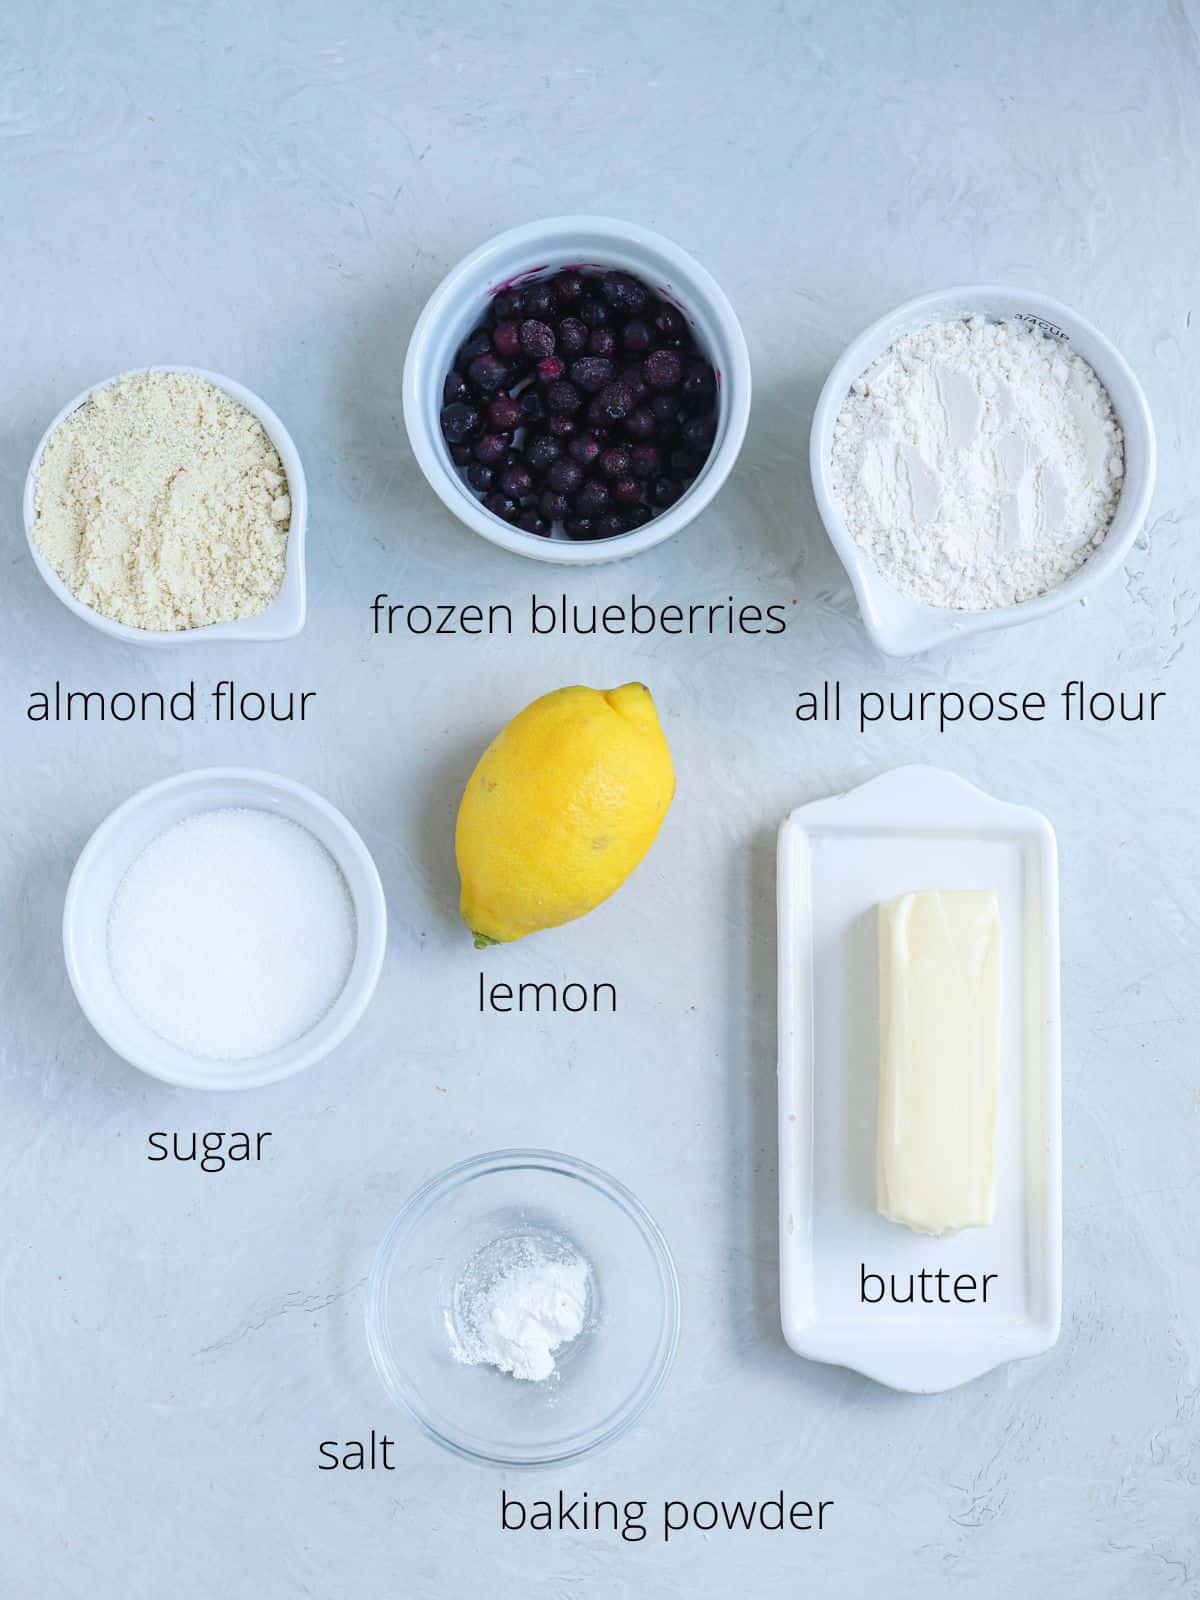 ingredients for blueberry lemon cookies on light gray surface with captions.